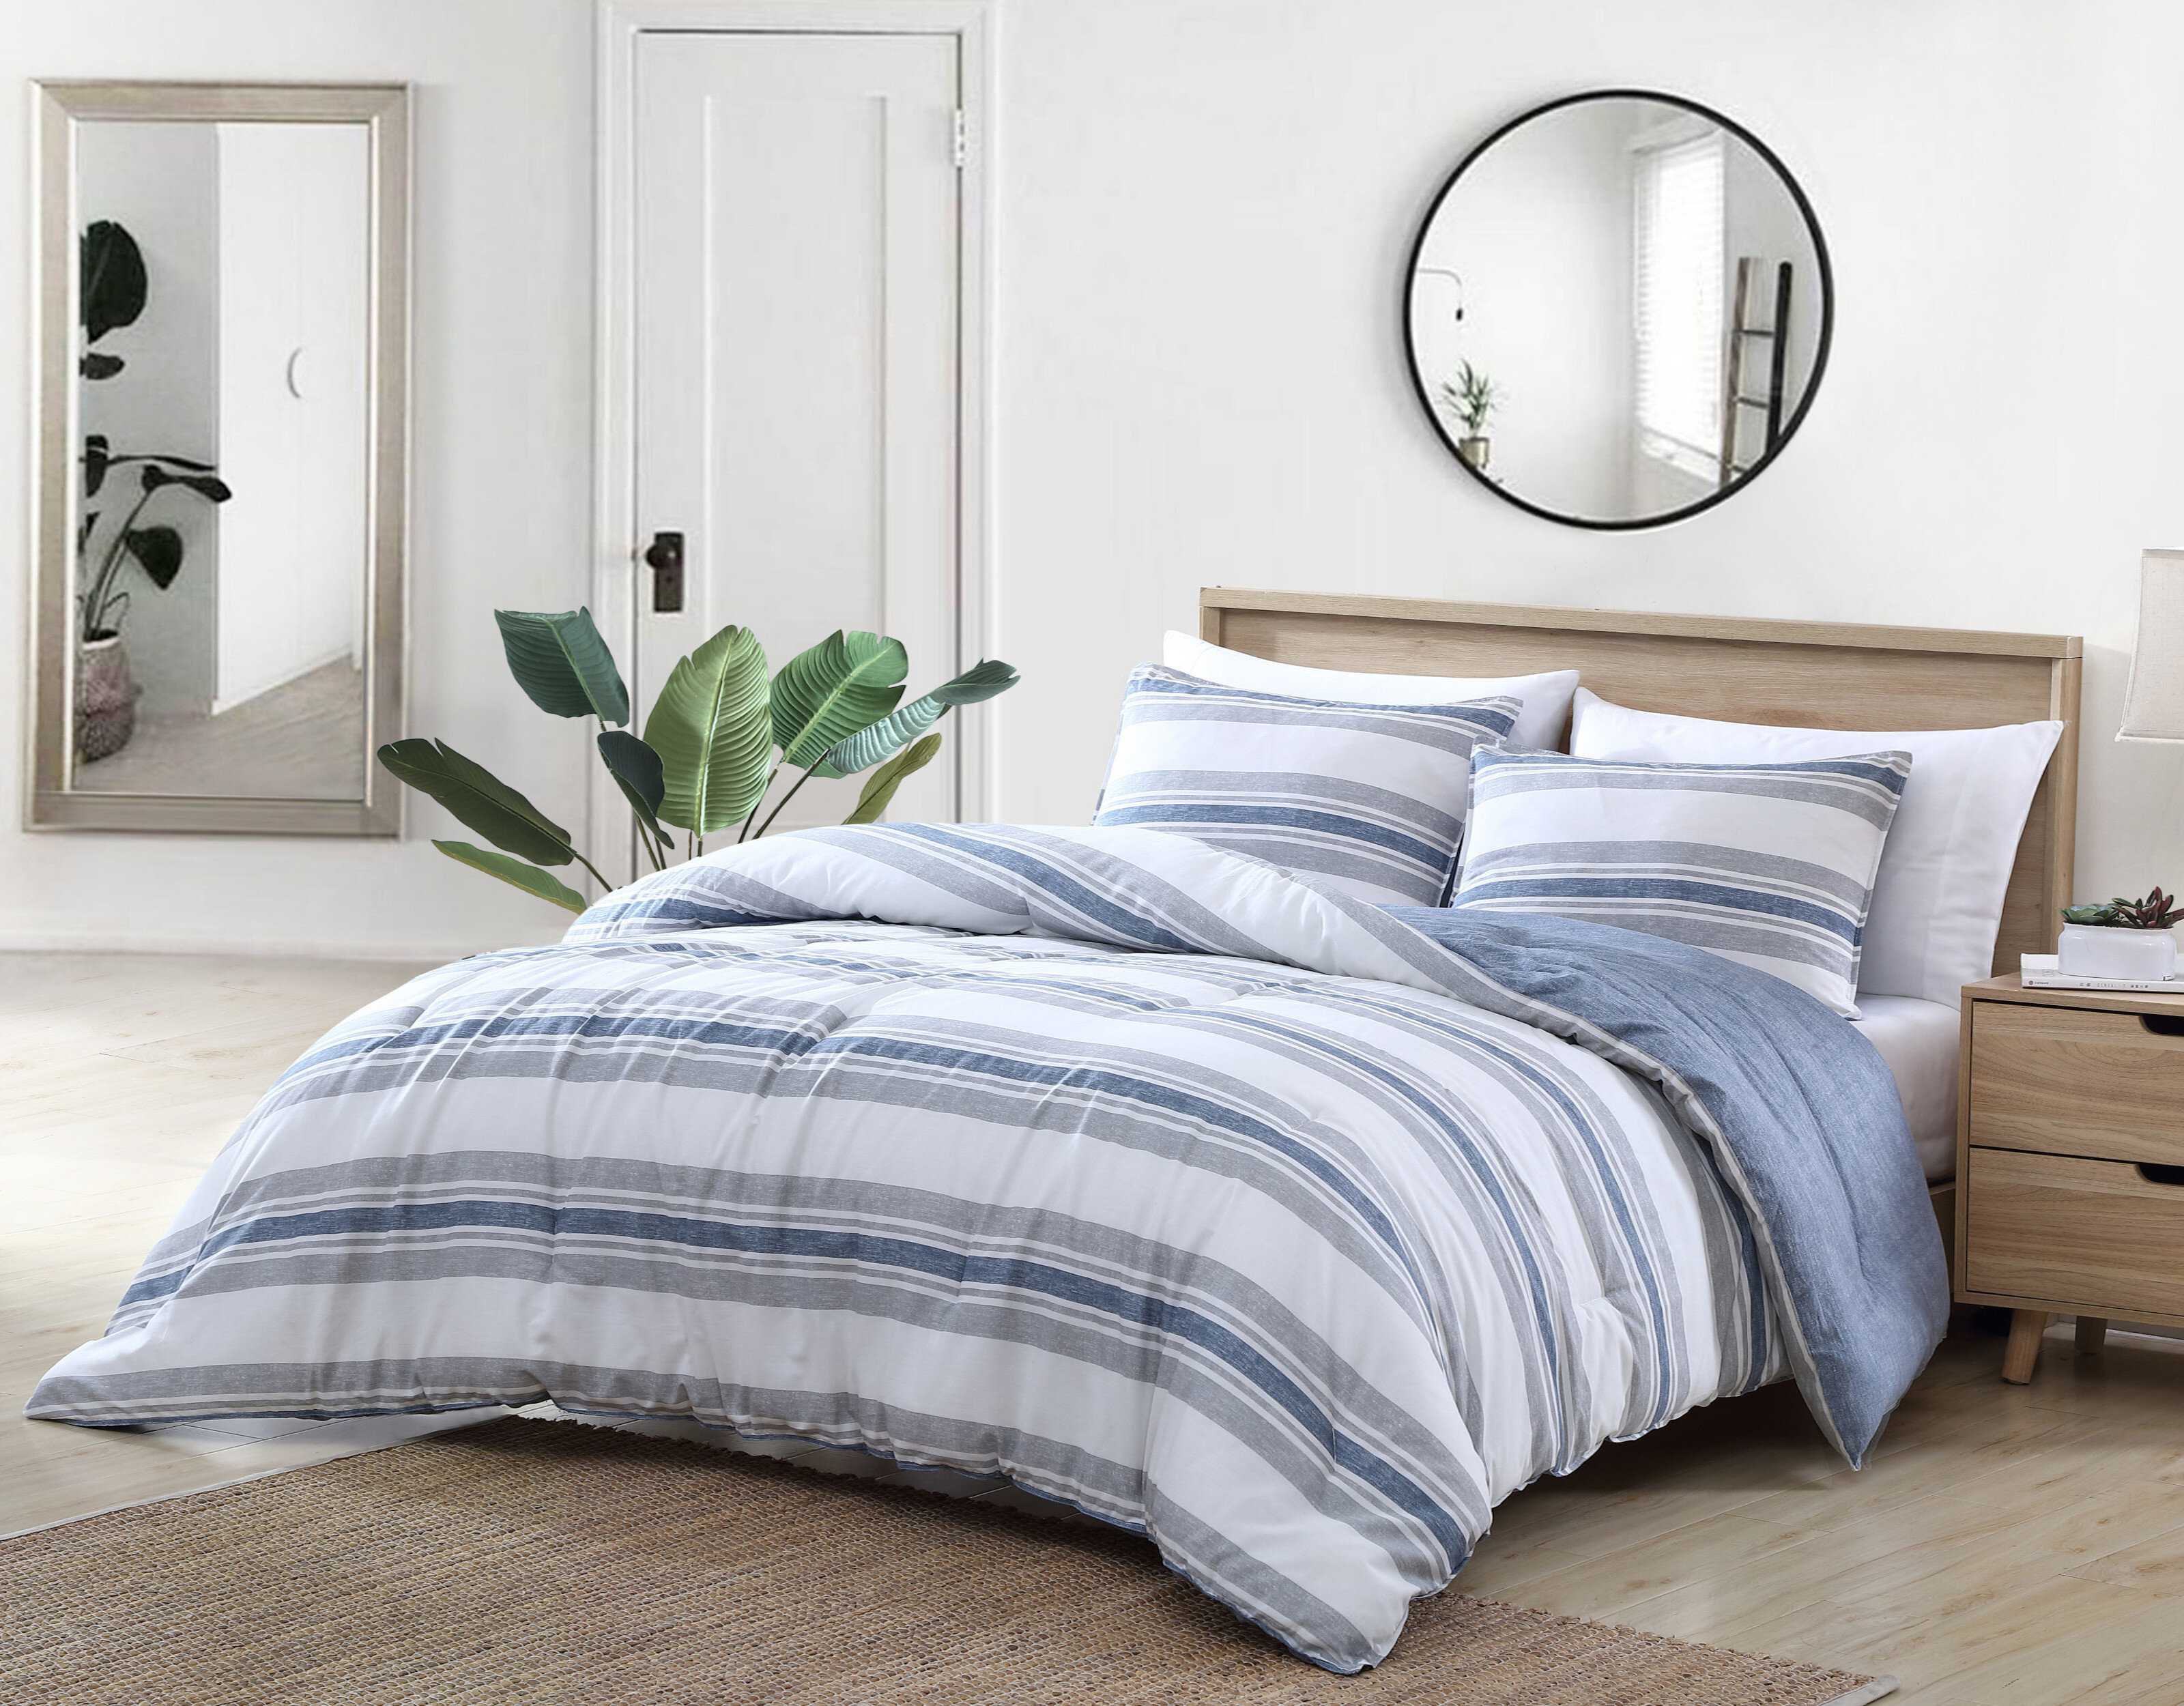 Nautica Mineola Reversible Comforter Set Kayleigh & Co. Details about   * NEW Full/Queen 